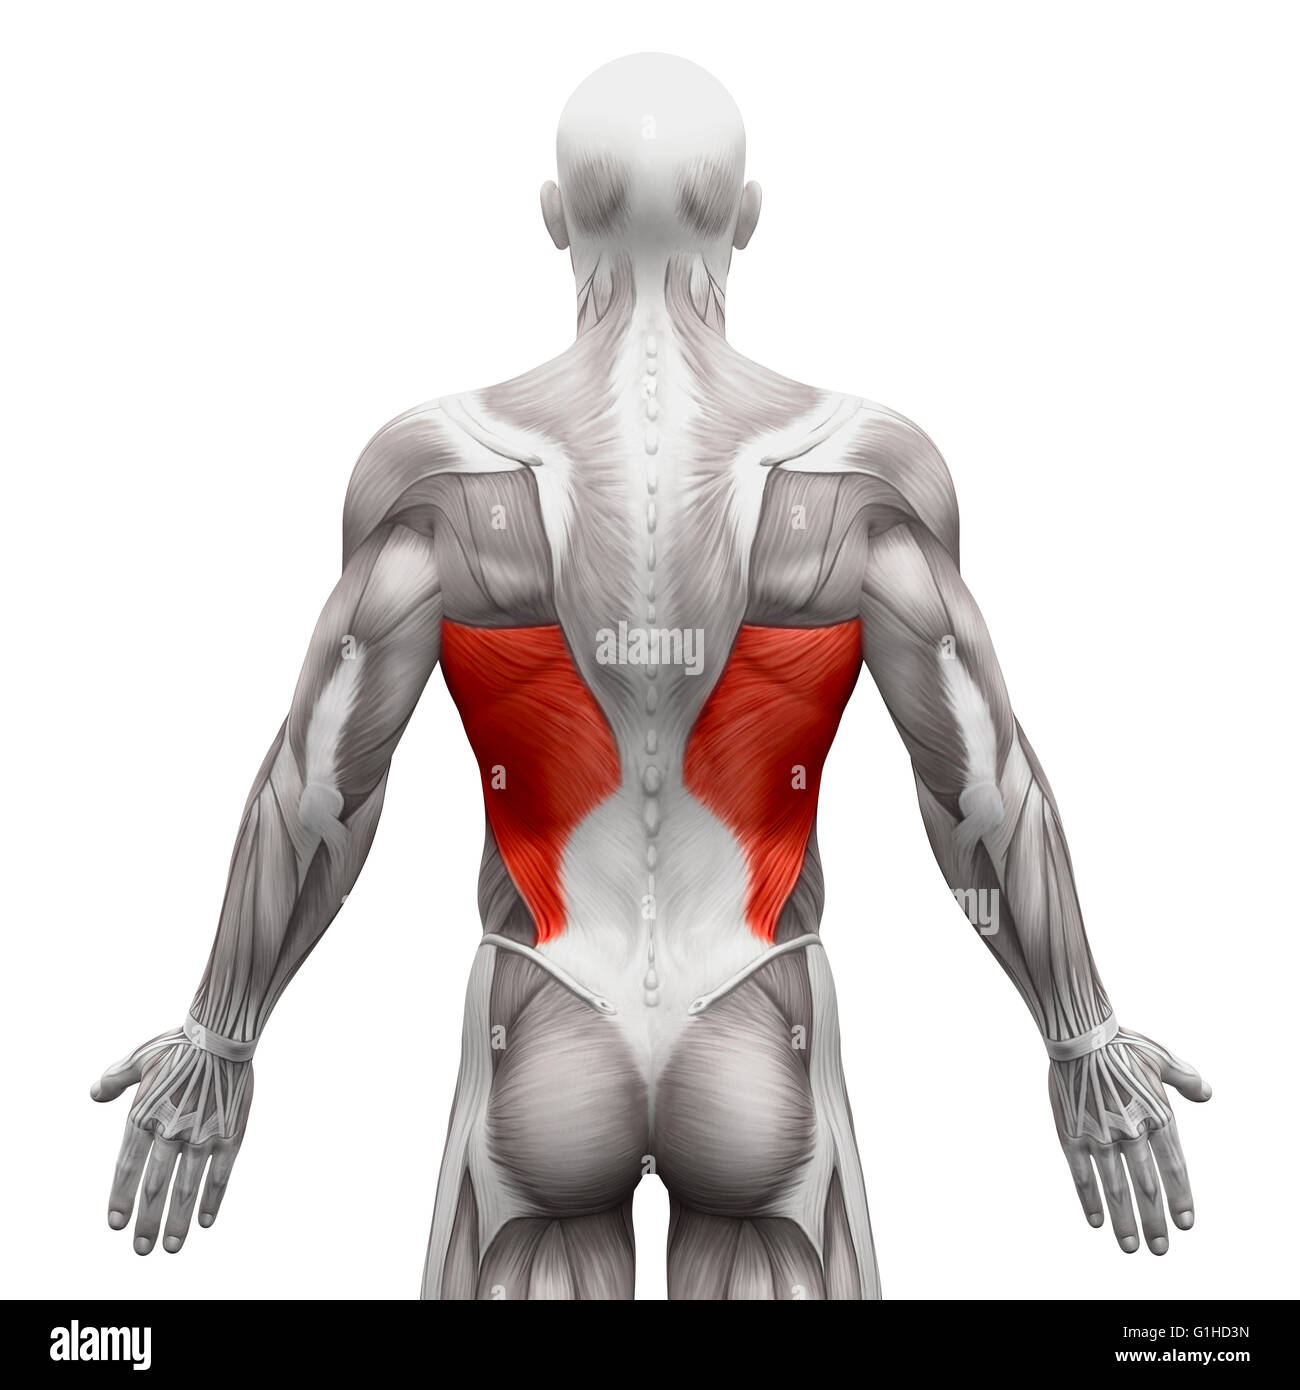 Illustration of Back Muscles - Stock Image - F031/5253 - Science Photo  Library